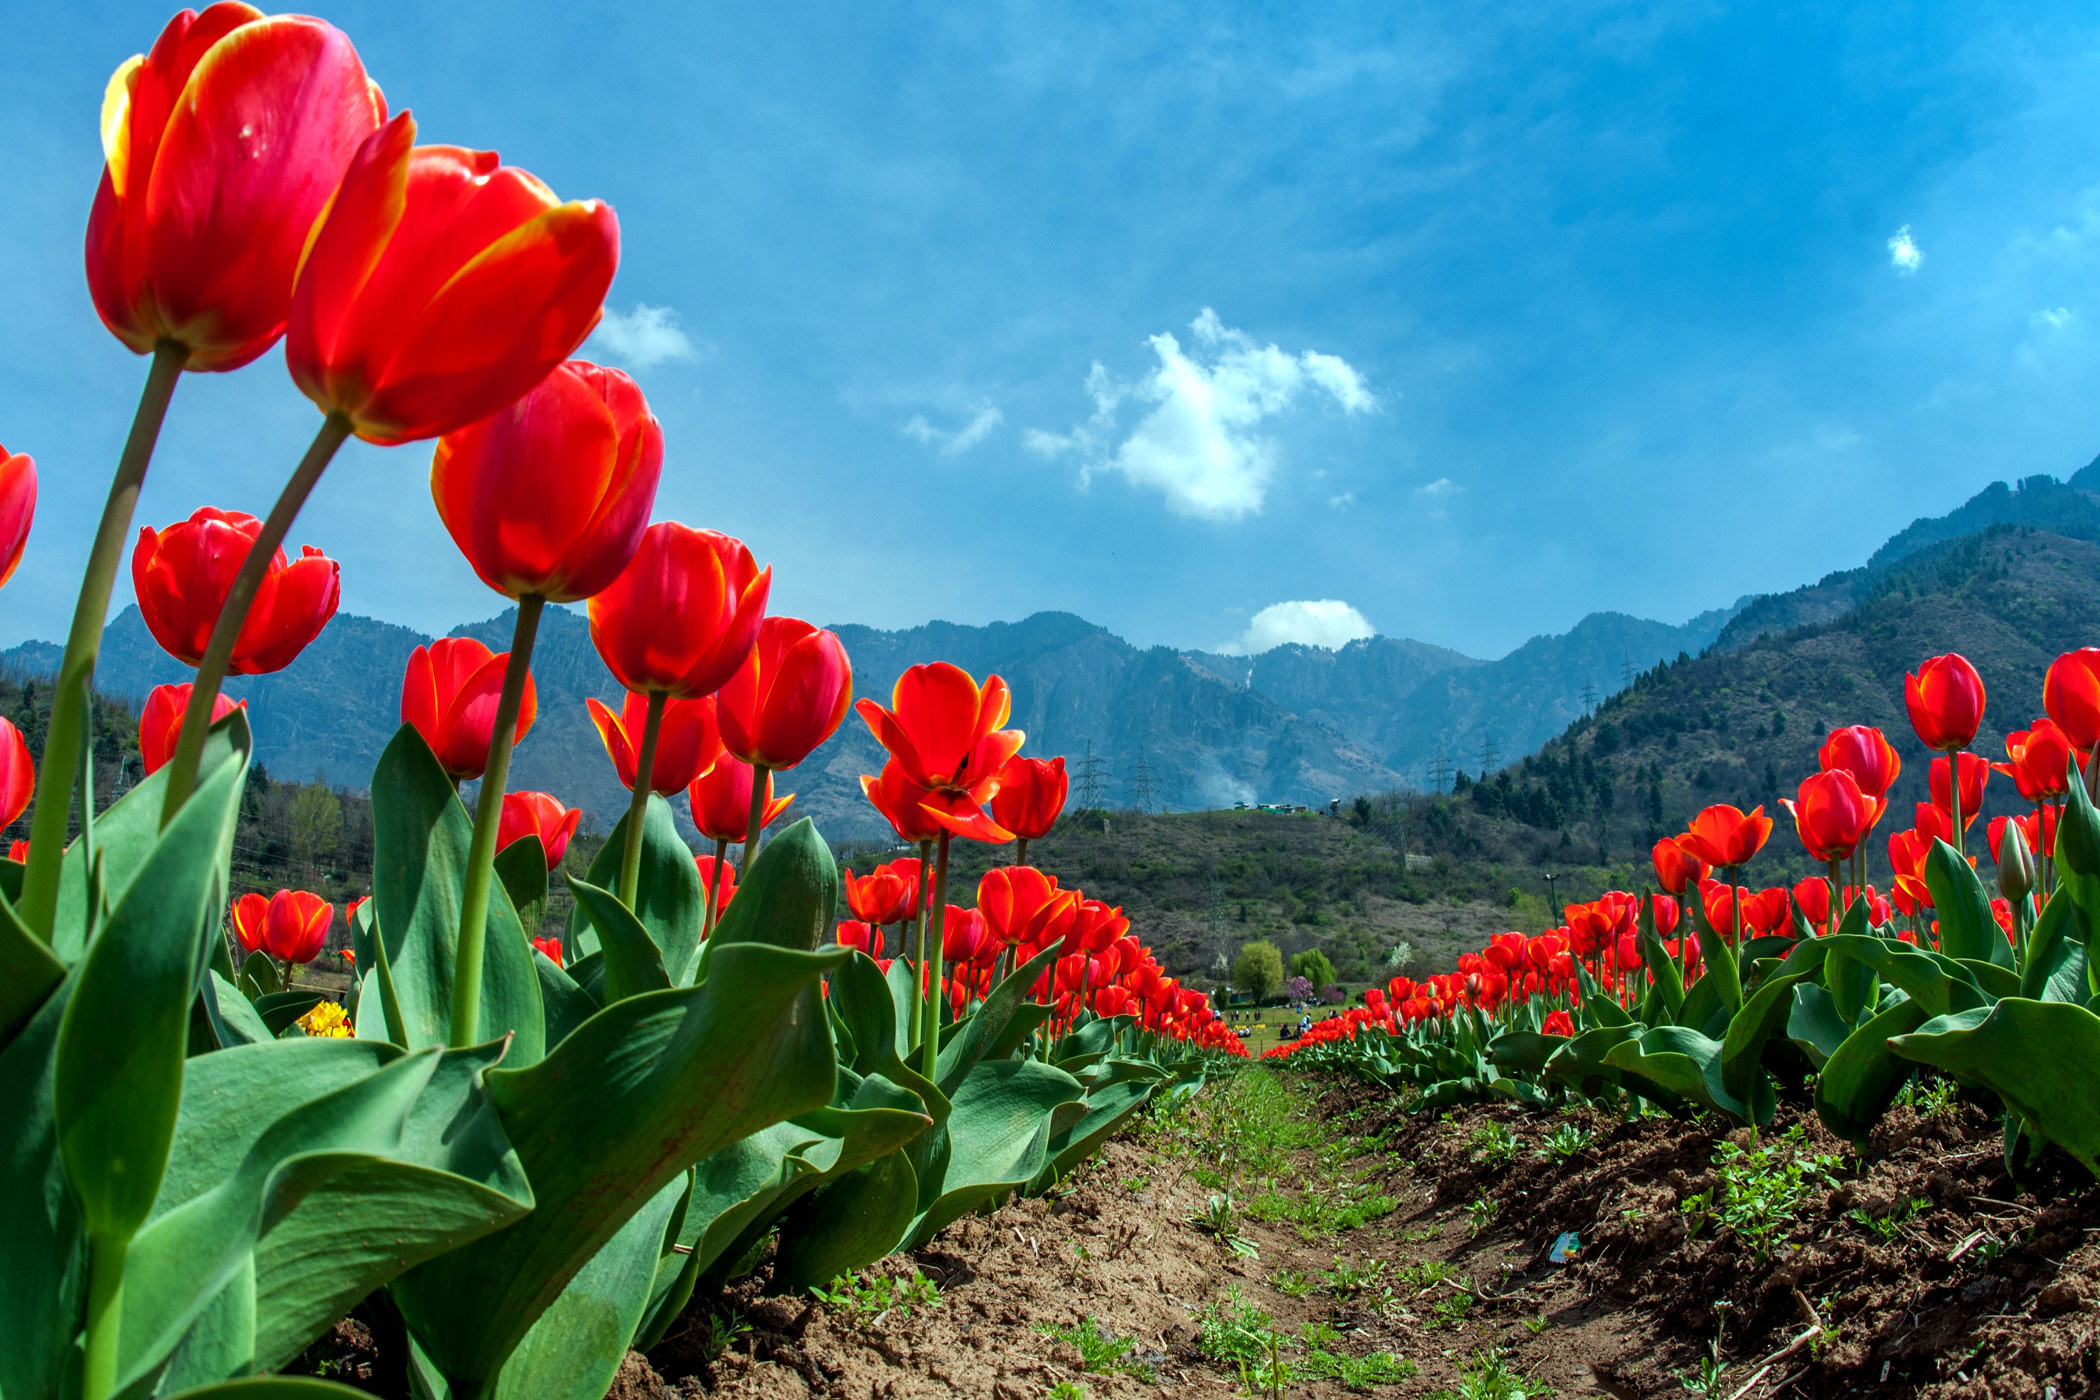 More than two million tulips are expected to bloom at the garden this spring.